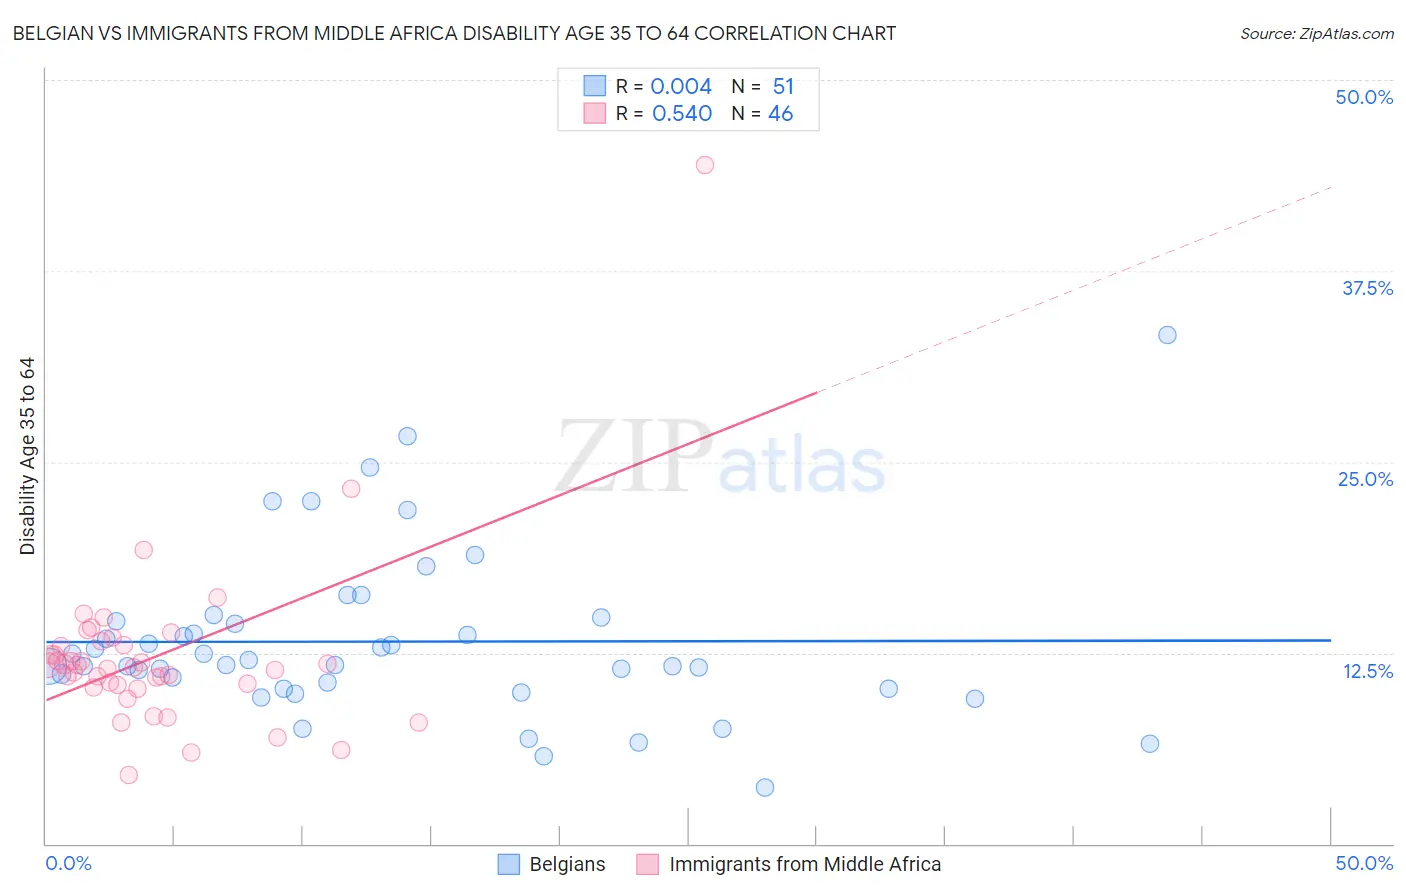 Belgian vs Immigrants from Middle Africa Disability Age 35 to 64